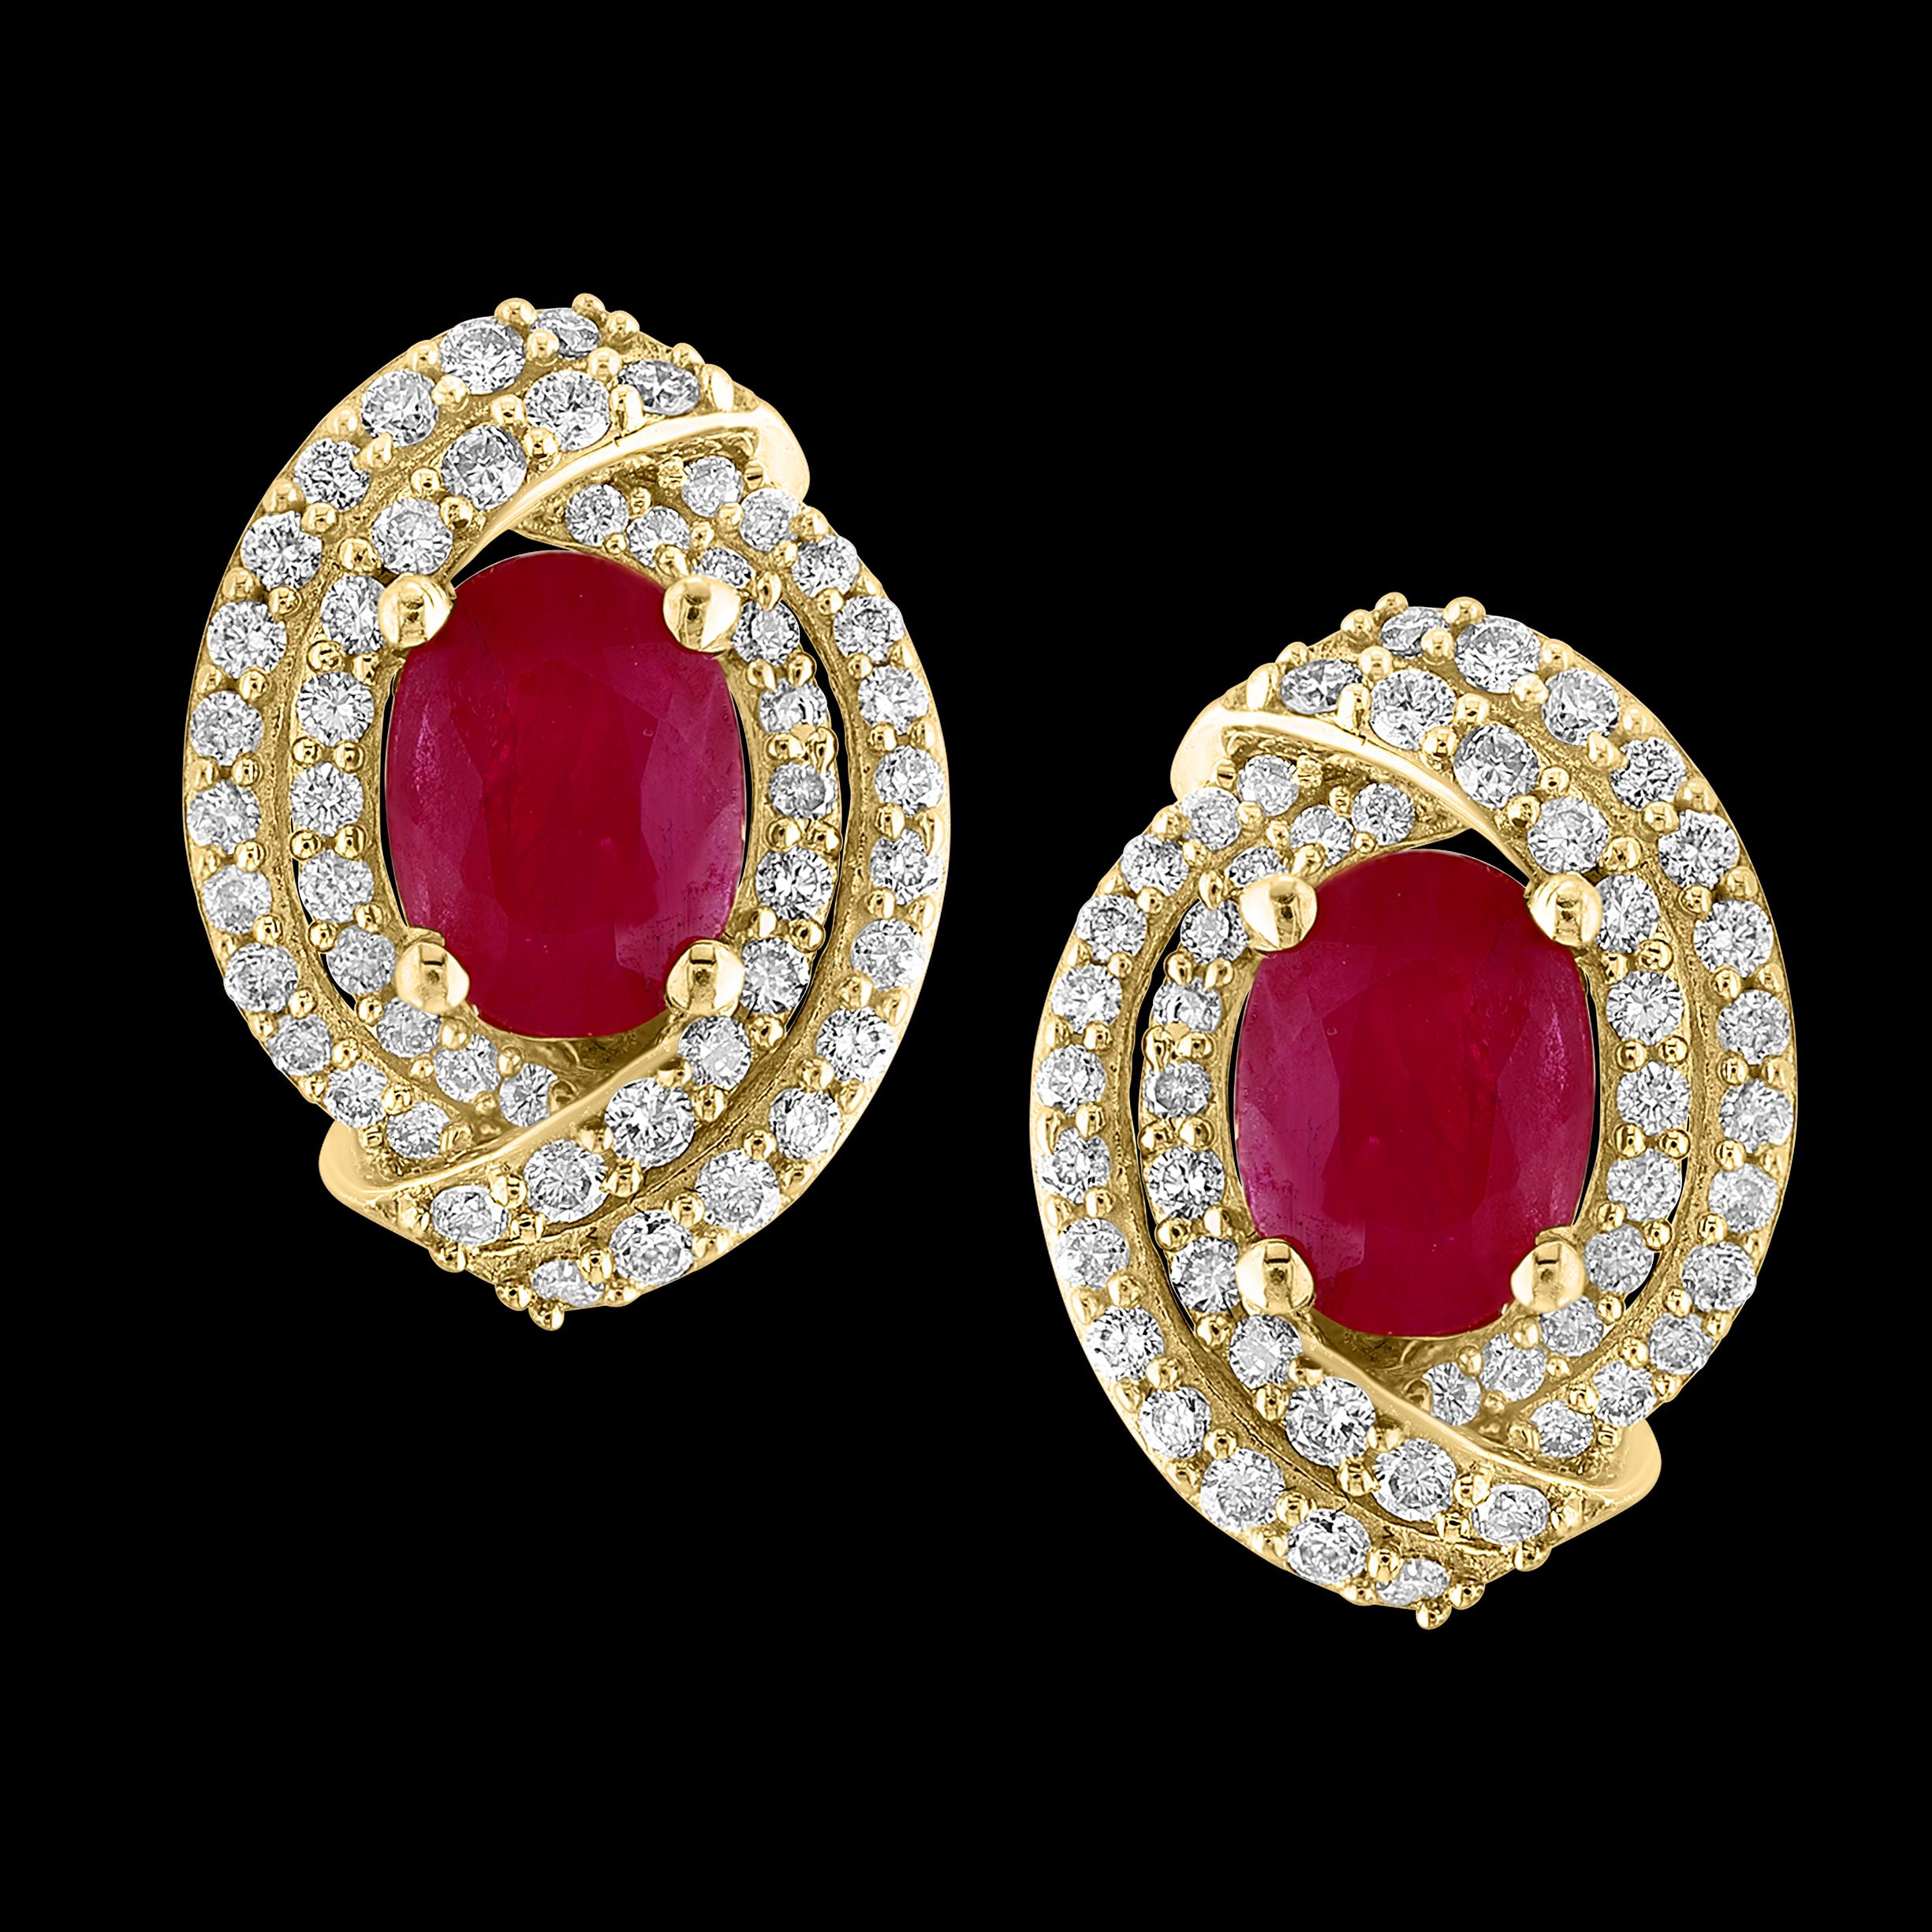 Experience the beauty and elegance of these stunning stud earrings, featuring a captivating combination of a 3.5 carat oval ruby and 1.2 carat brilliant cut diamonds. Expertly crafted with 14 karat yellow gold, these earrings offer a timeless and